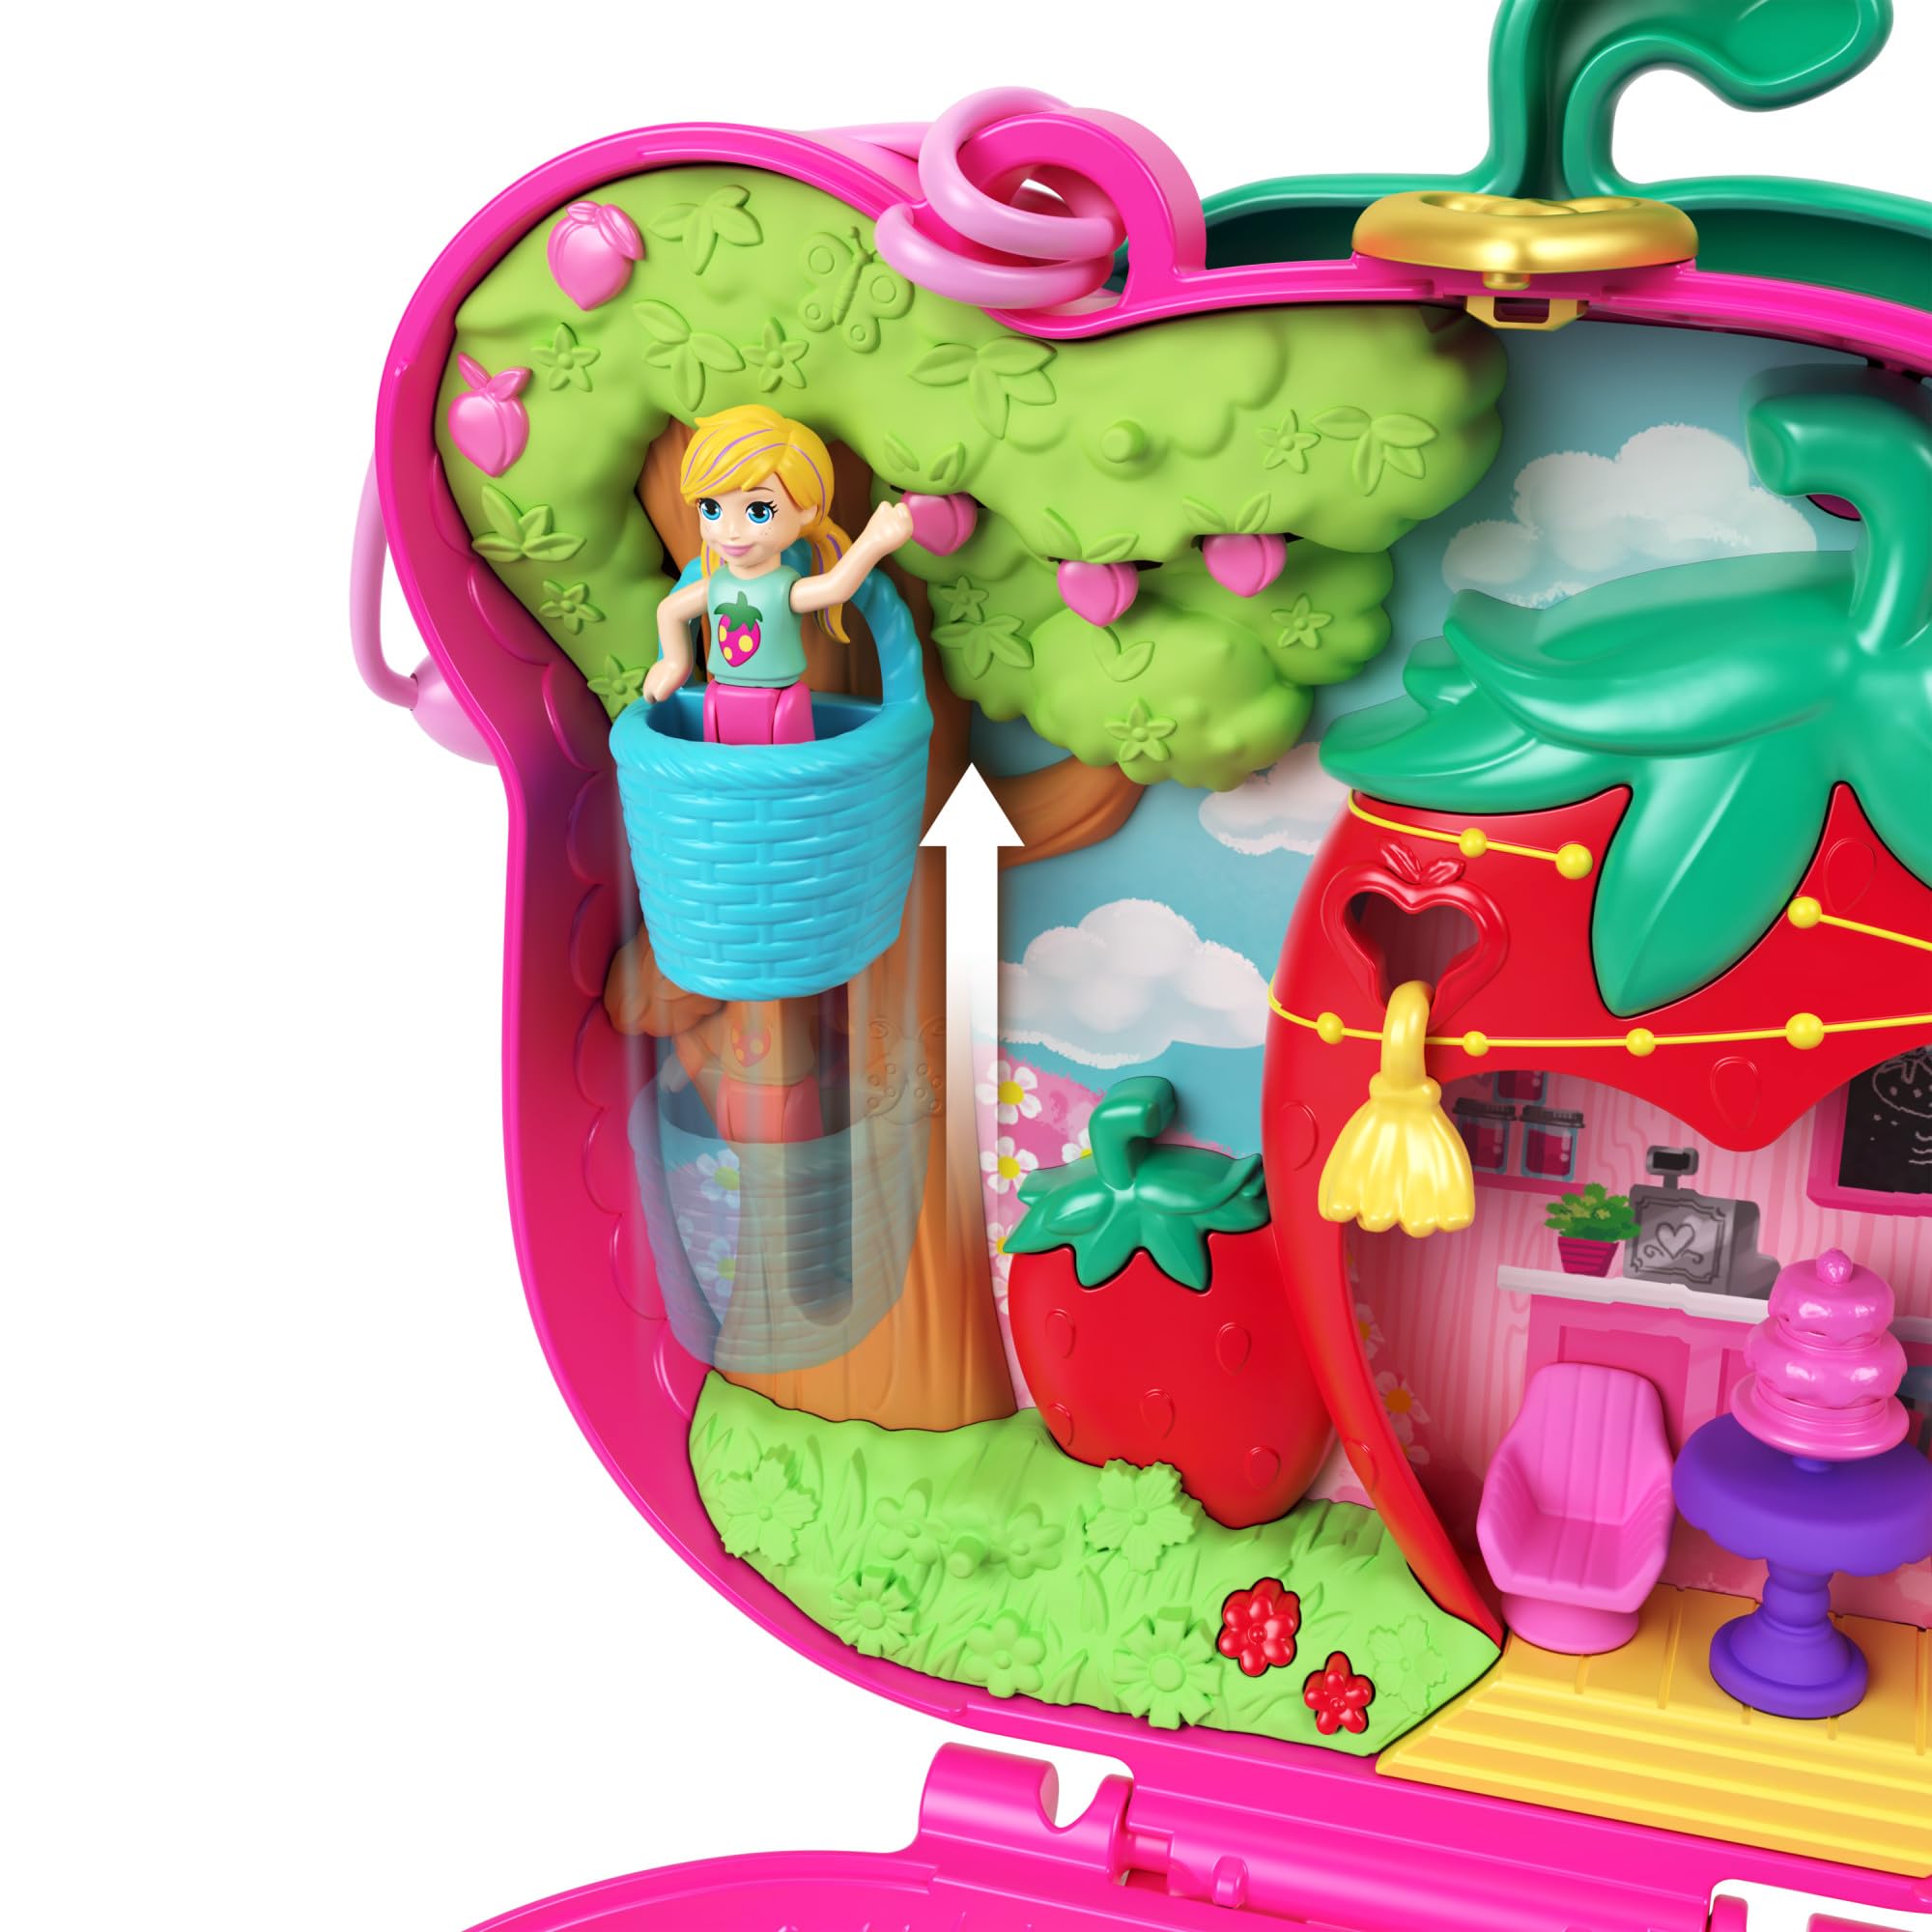 Polly Pocket Dolls and Playset, Travel Toy with Fidget Exterior, Straw-beary Patch Compact with 12 Accessories